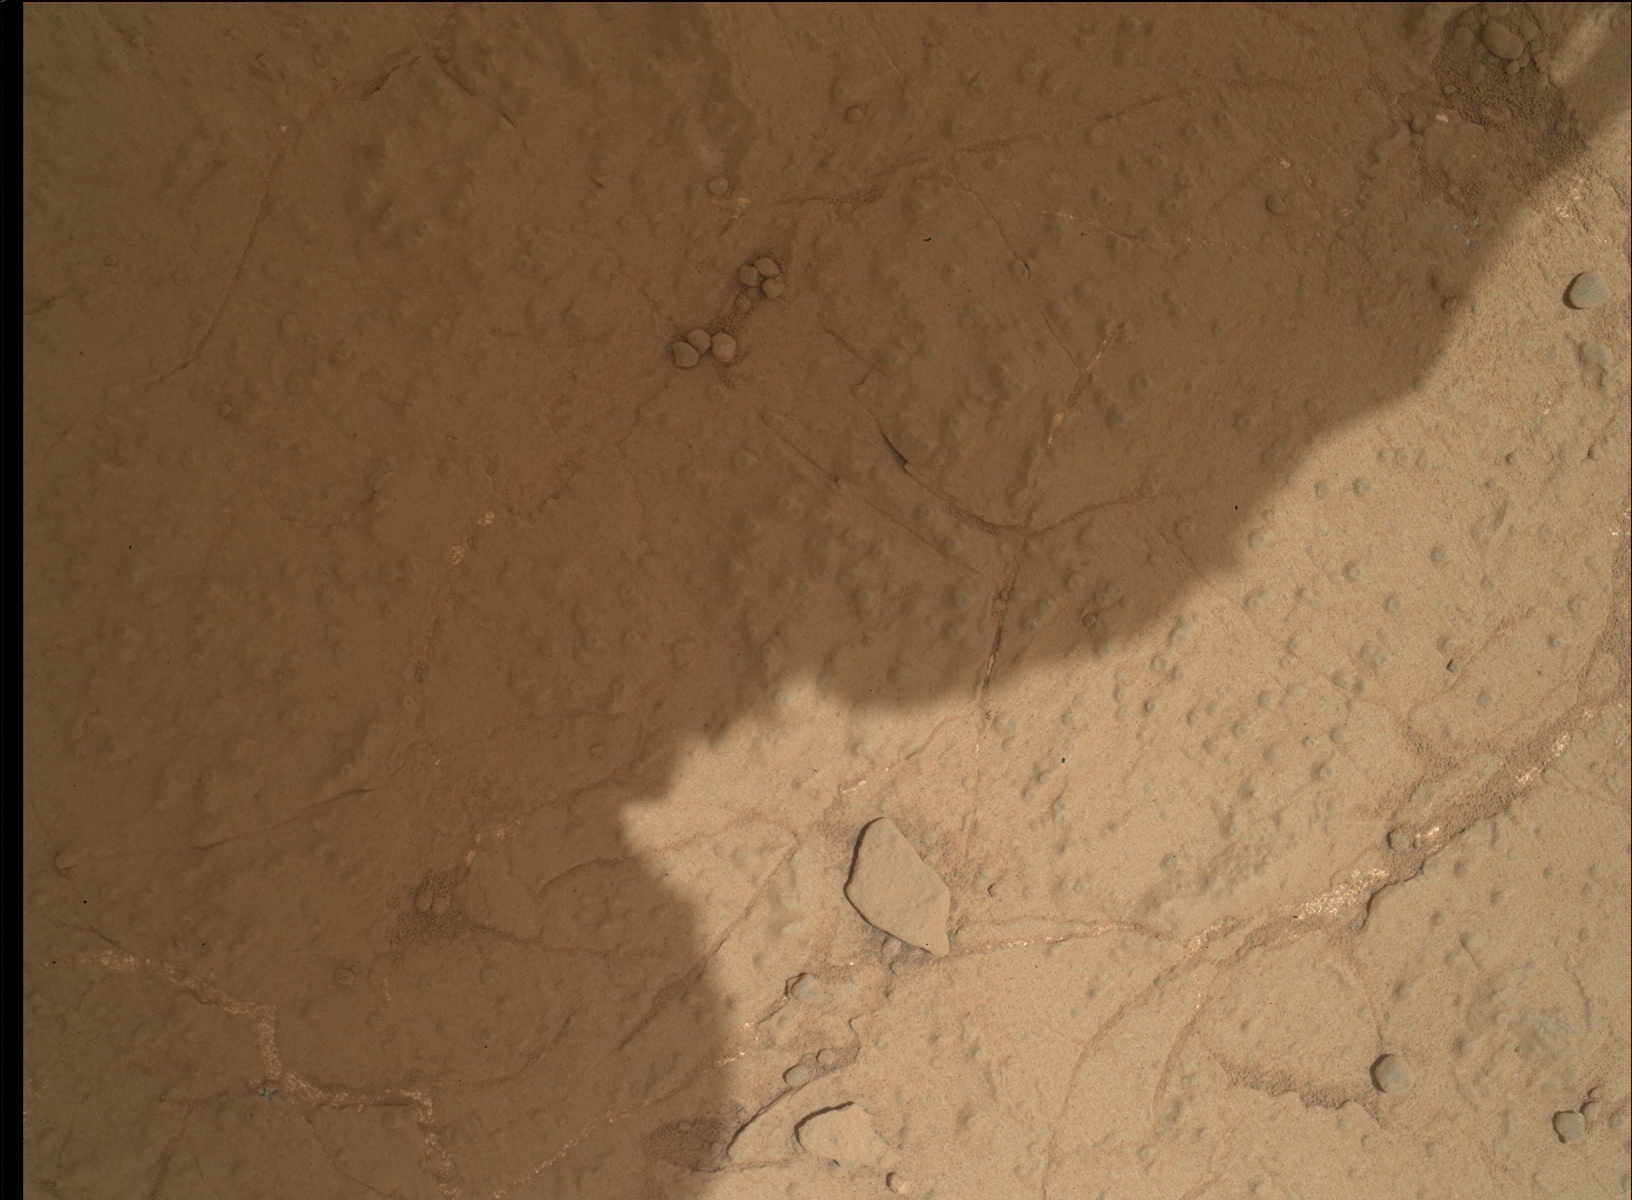 Nasa's Mars rover Curiosity acquired this image using its Mars Hand Lens Imager (MAHLI) on Sol 276